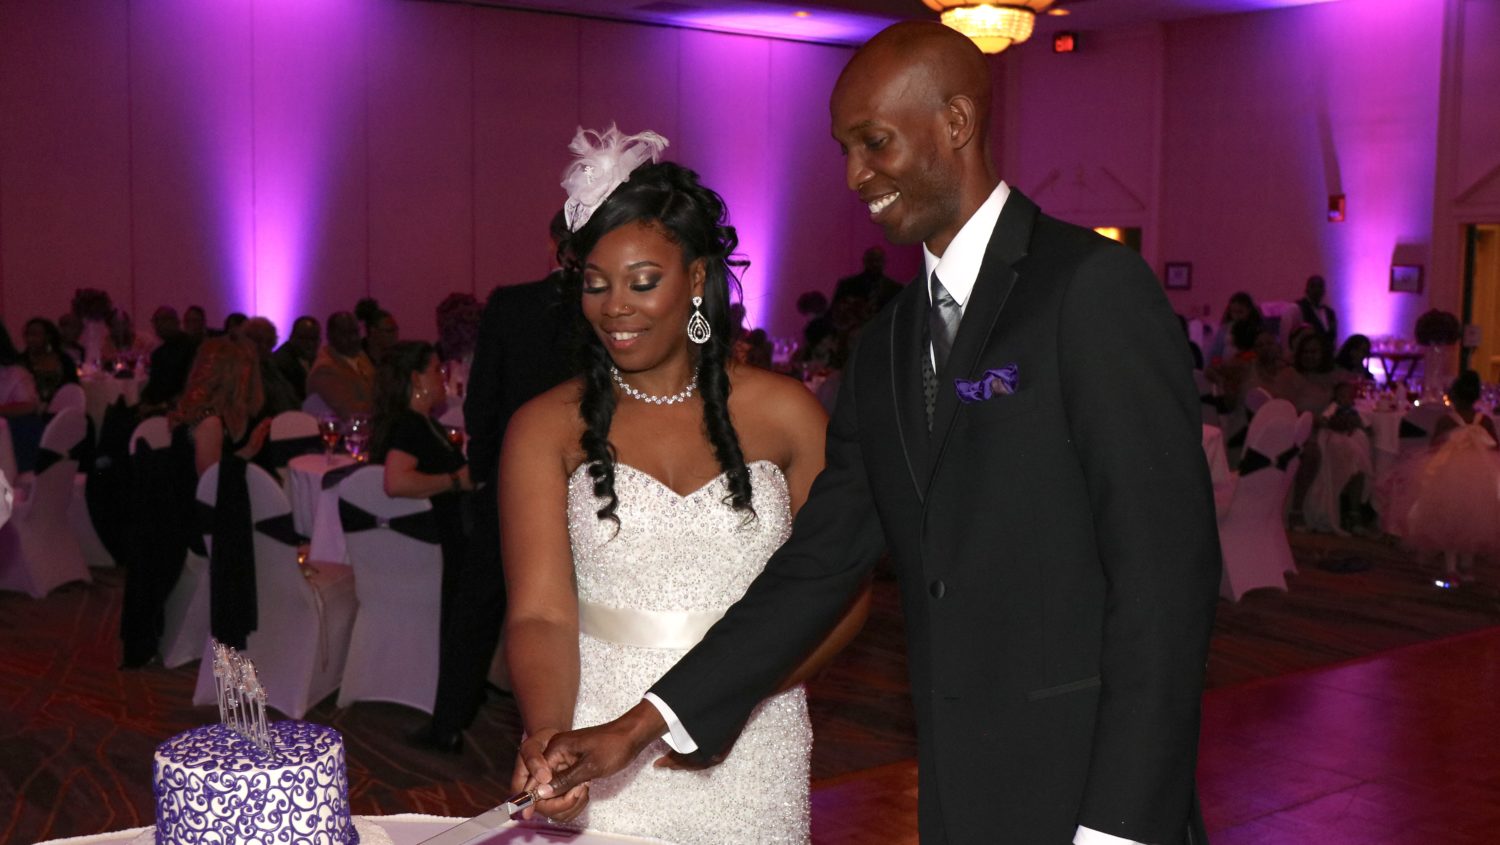 bride and groom cutting cake with purple uplights